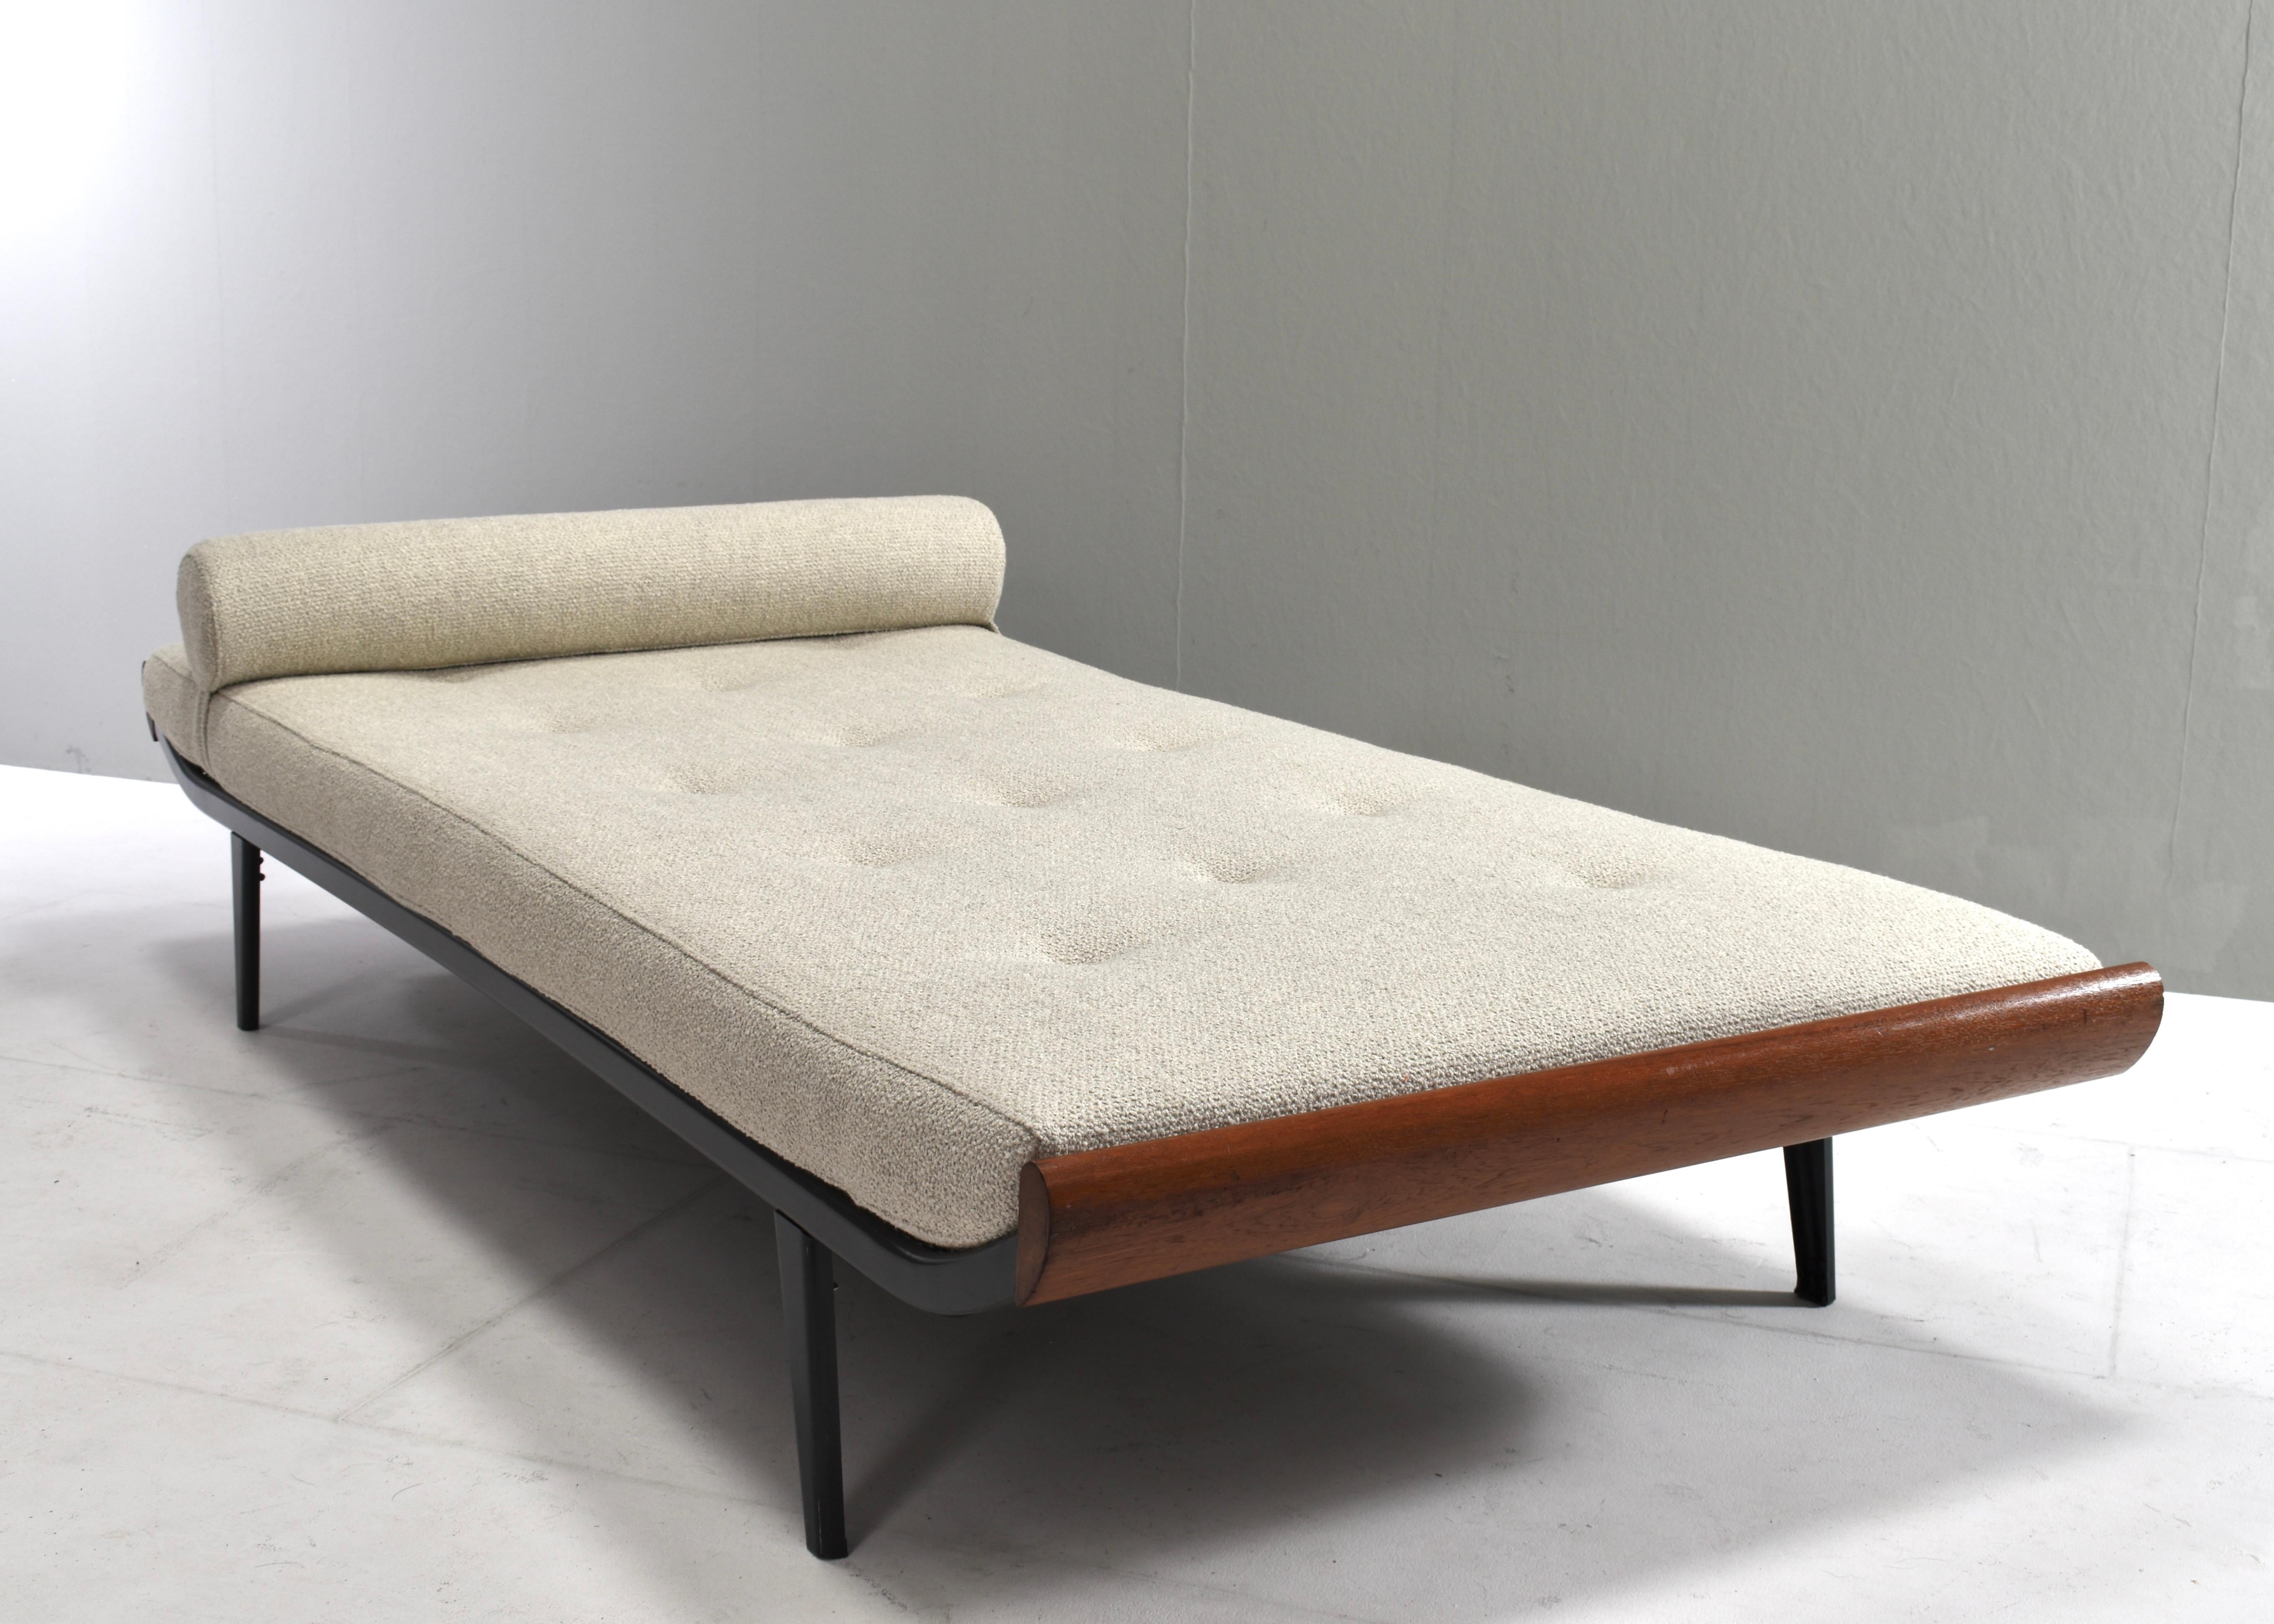 Metal Cleopatra Daybed Designed by Cordemeyer for Auping, Netherlands, 1954